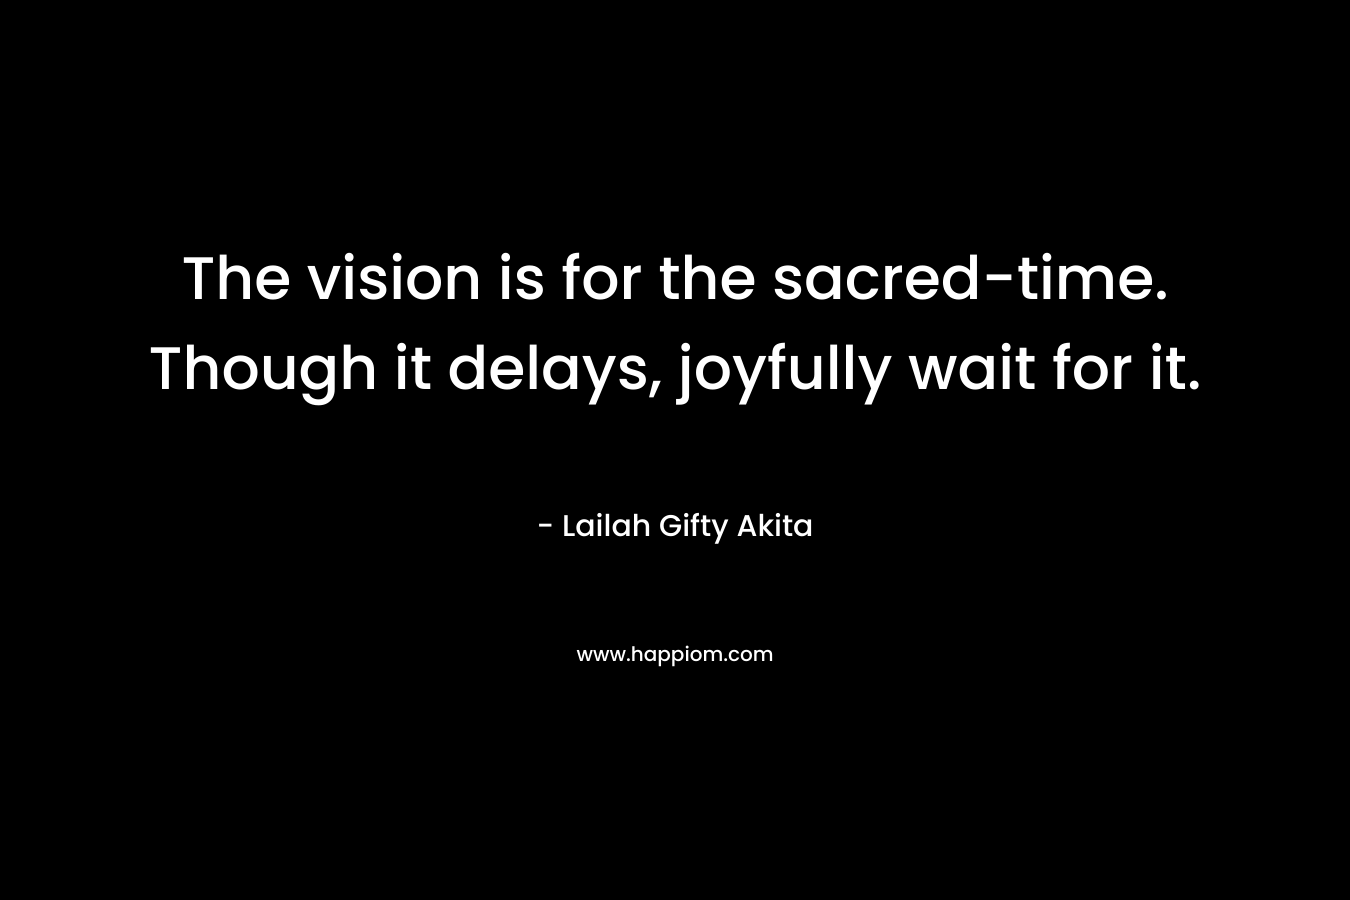 The vision is for the sacred-time. Though it delays, joyfully wait for it. – Lailah Gifty Akita